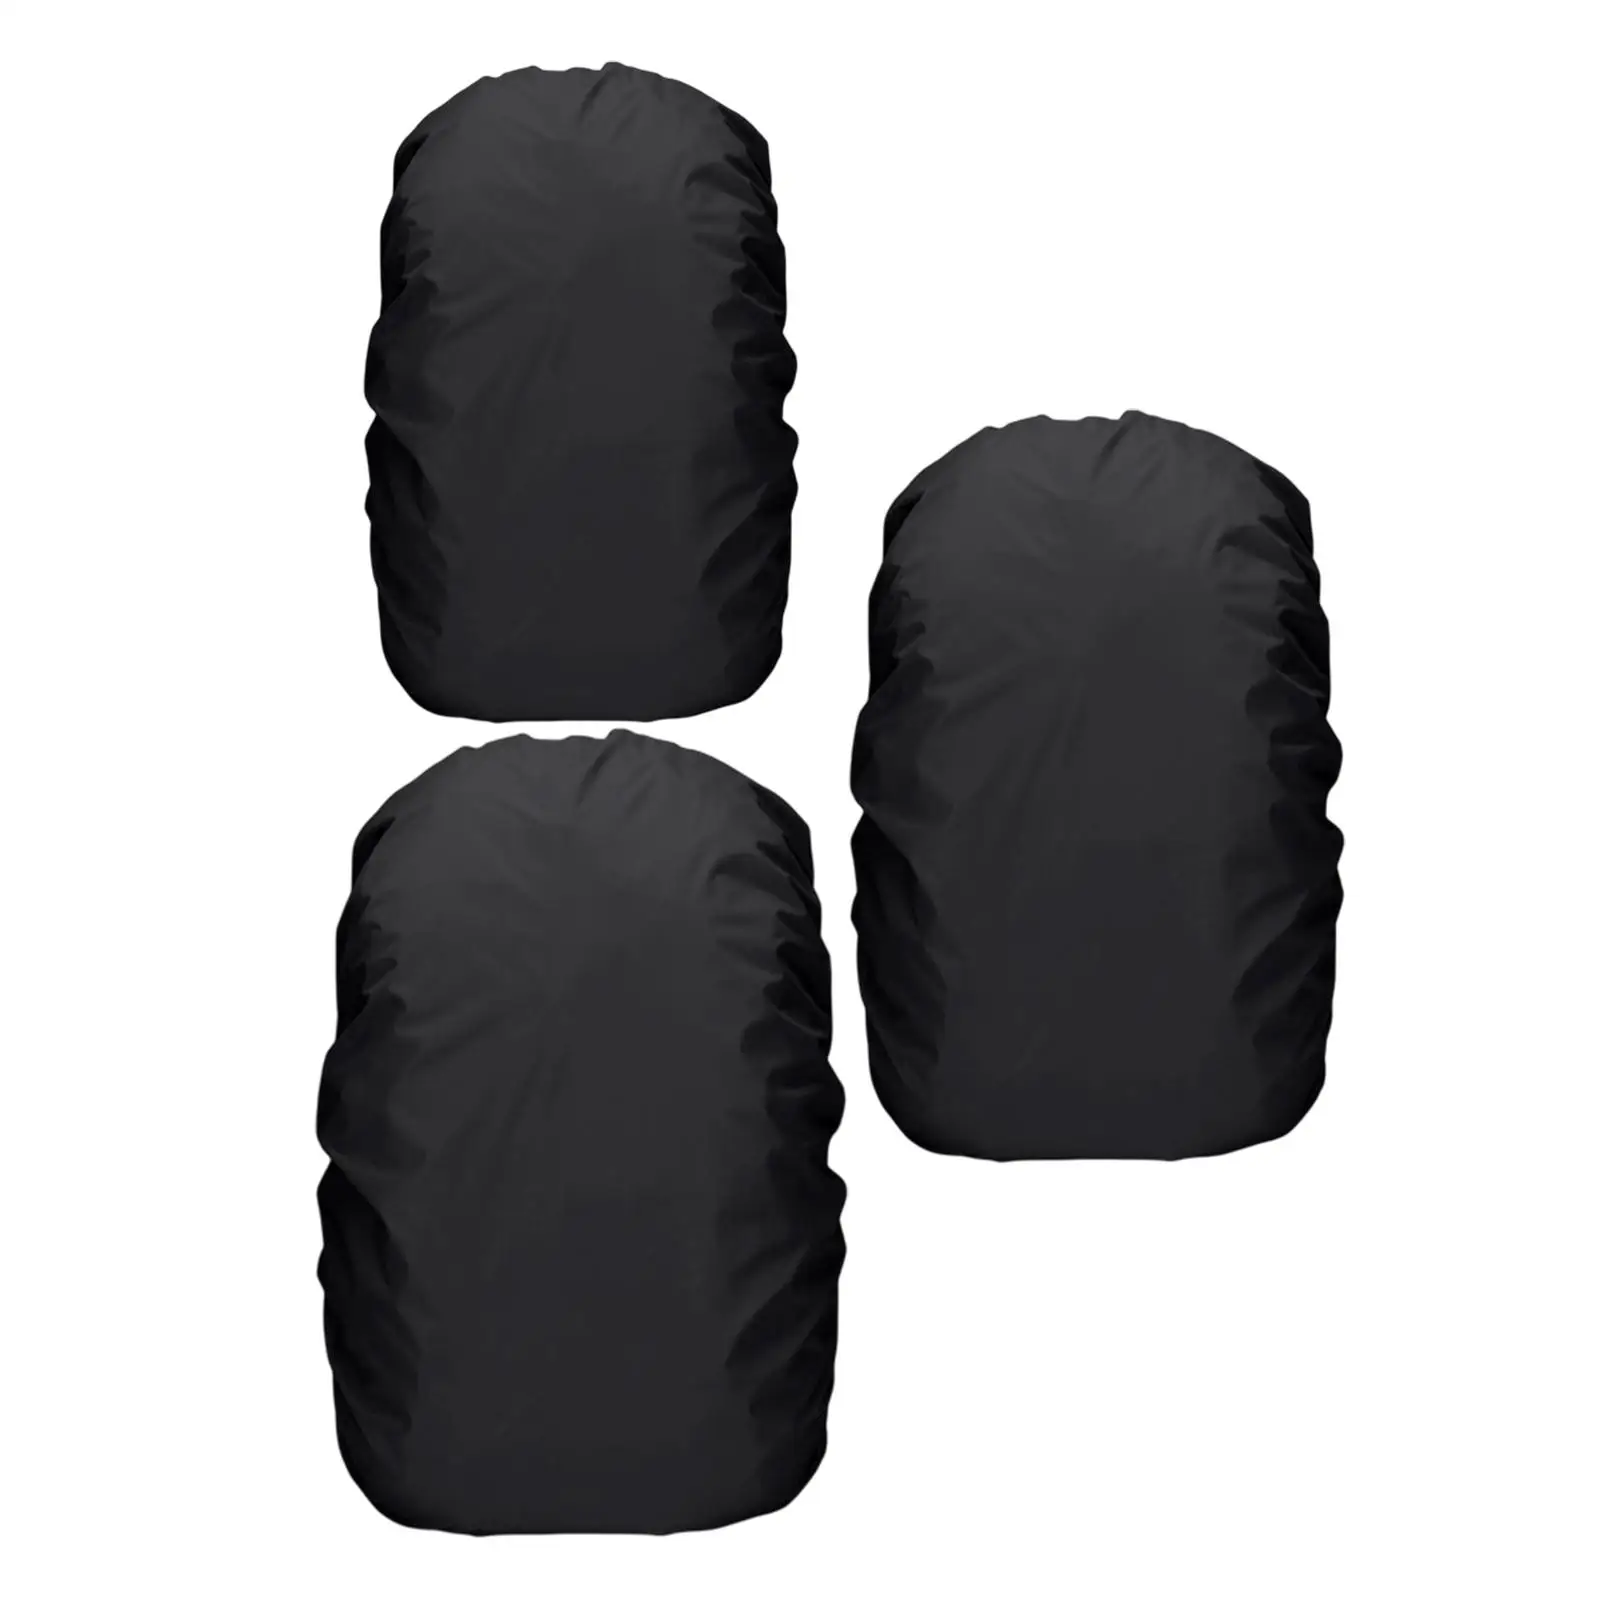 Backpack Rain Cover Protective Cover Portable Rain Protection for Backpack Cover for Mountain Climbing Outdoor Activities Biking